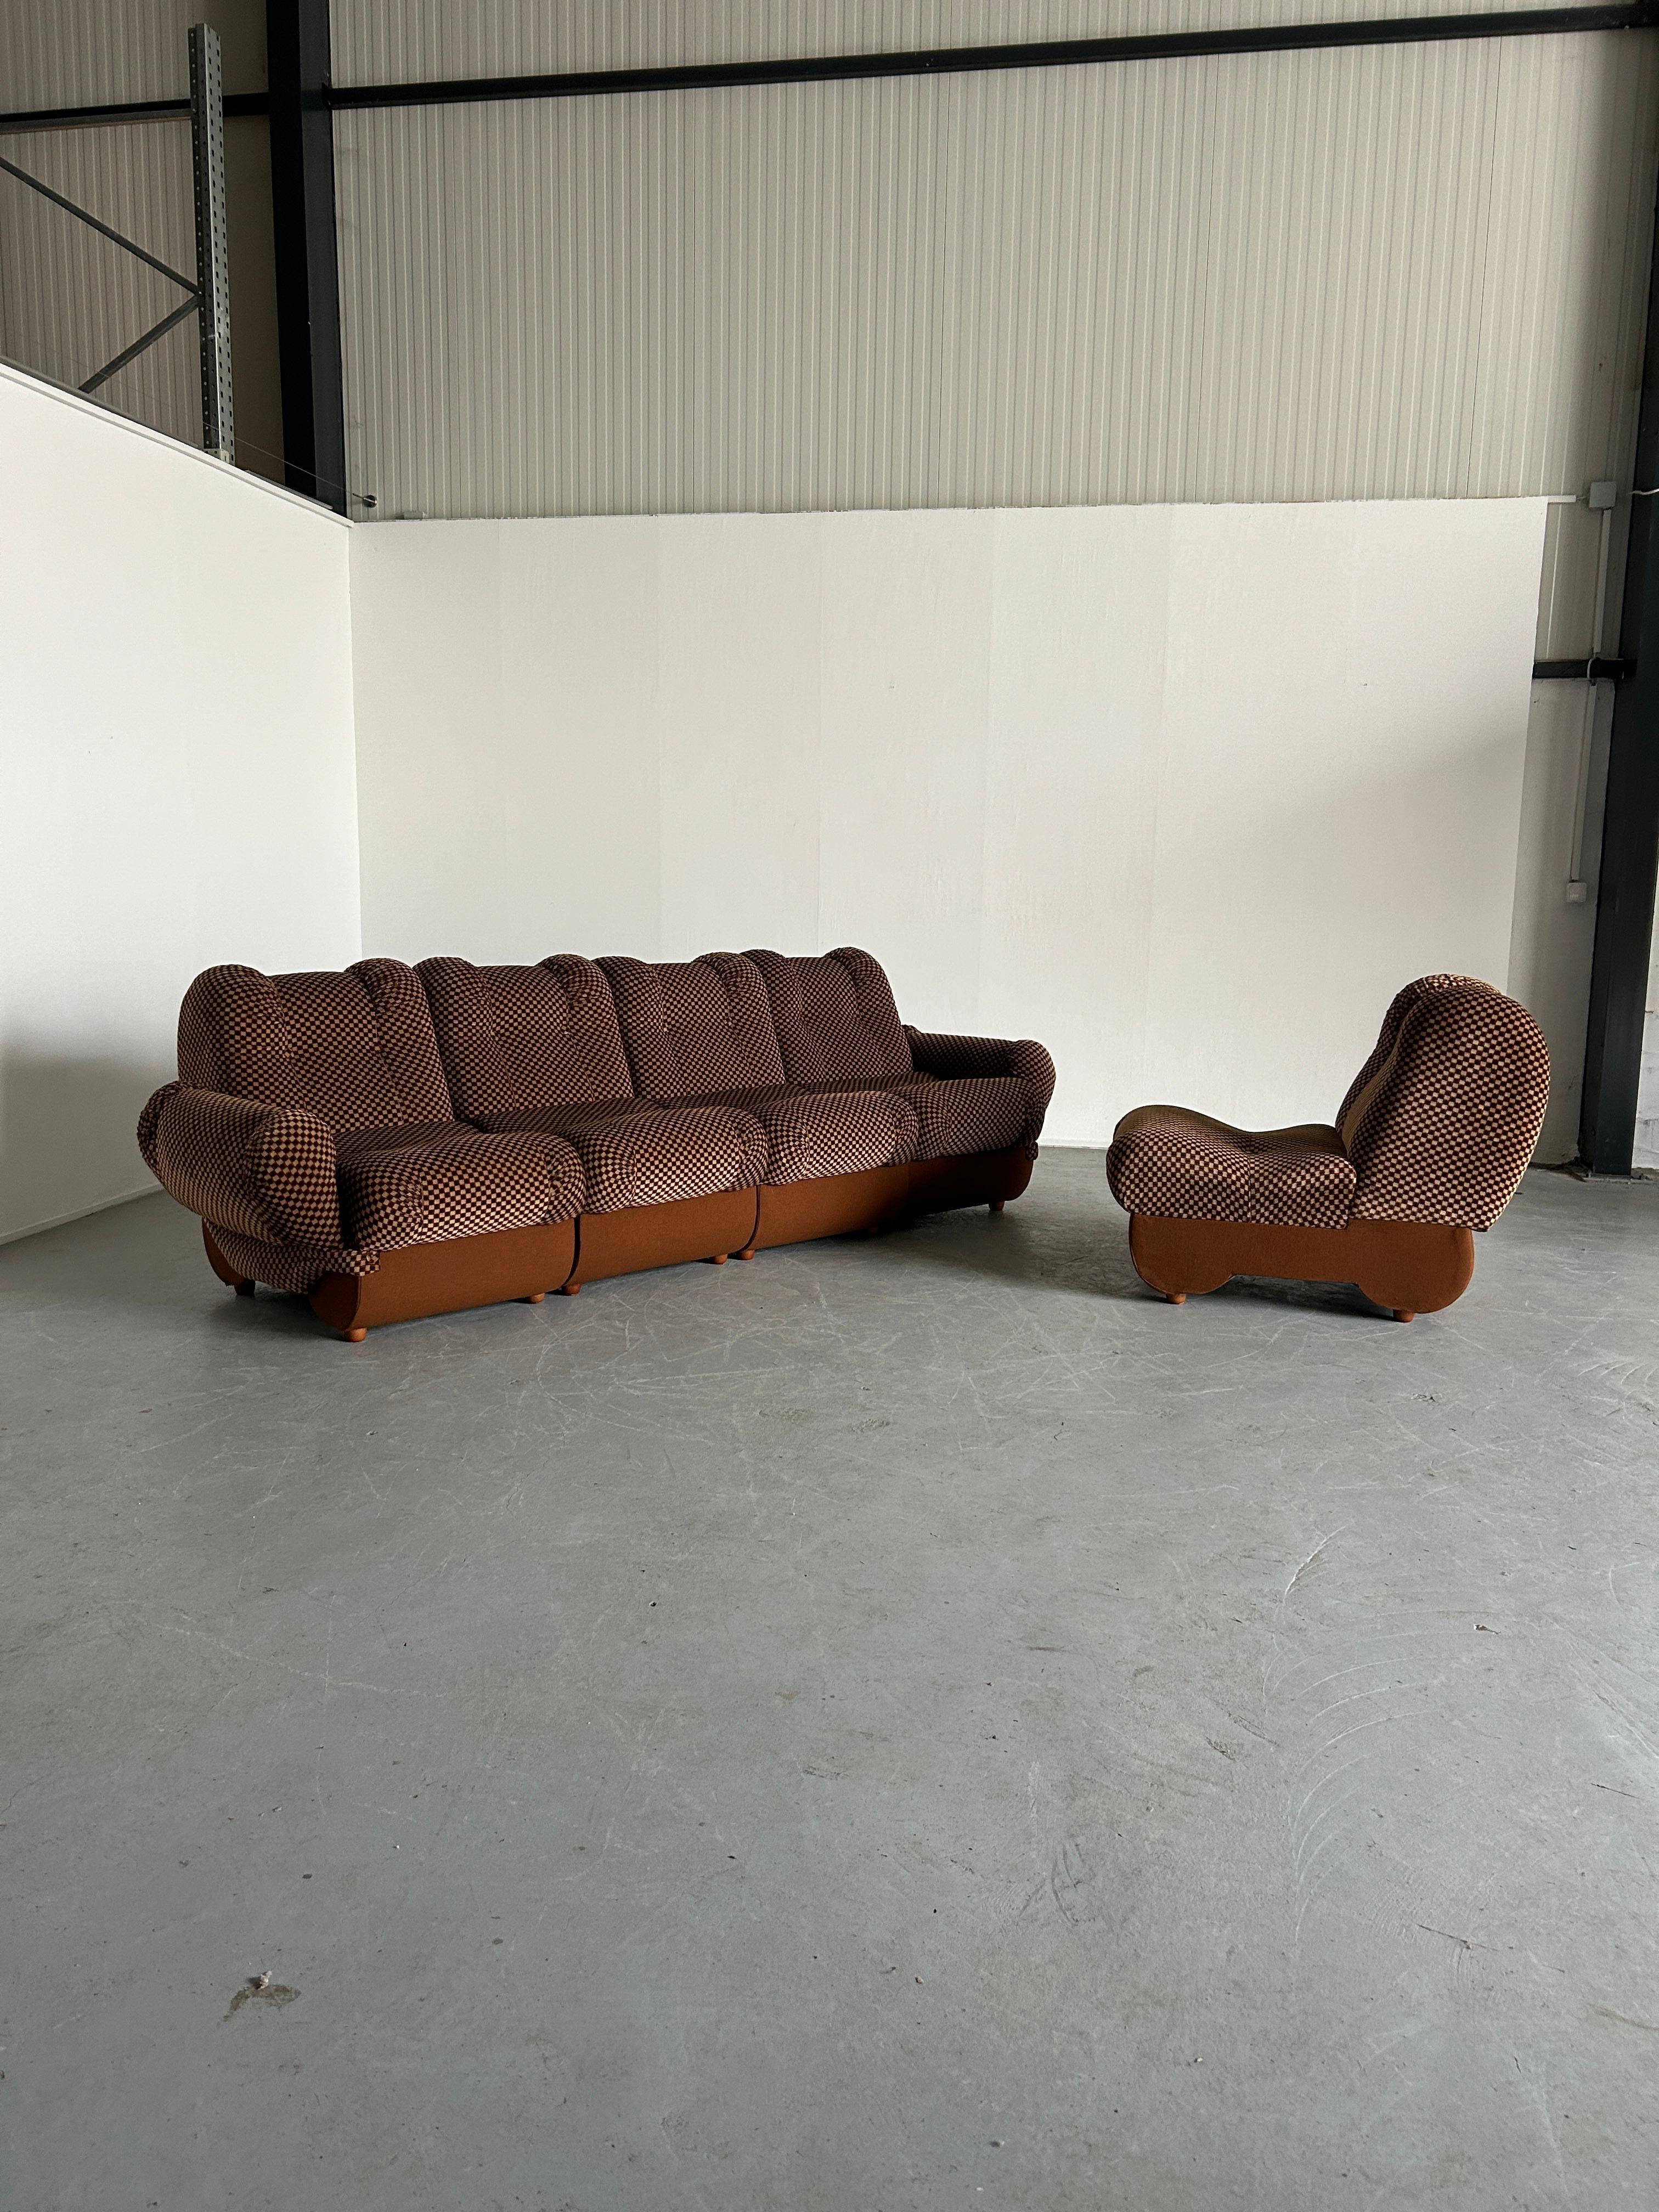 Mid-20th Century Large Space Age Cloud Modular Sofa Set in Brown Striped Fabric, Italy 1960s For Sale